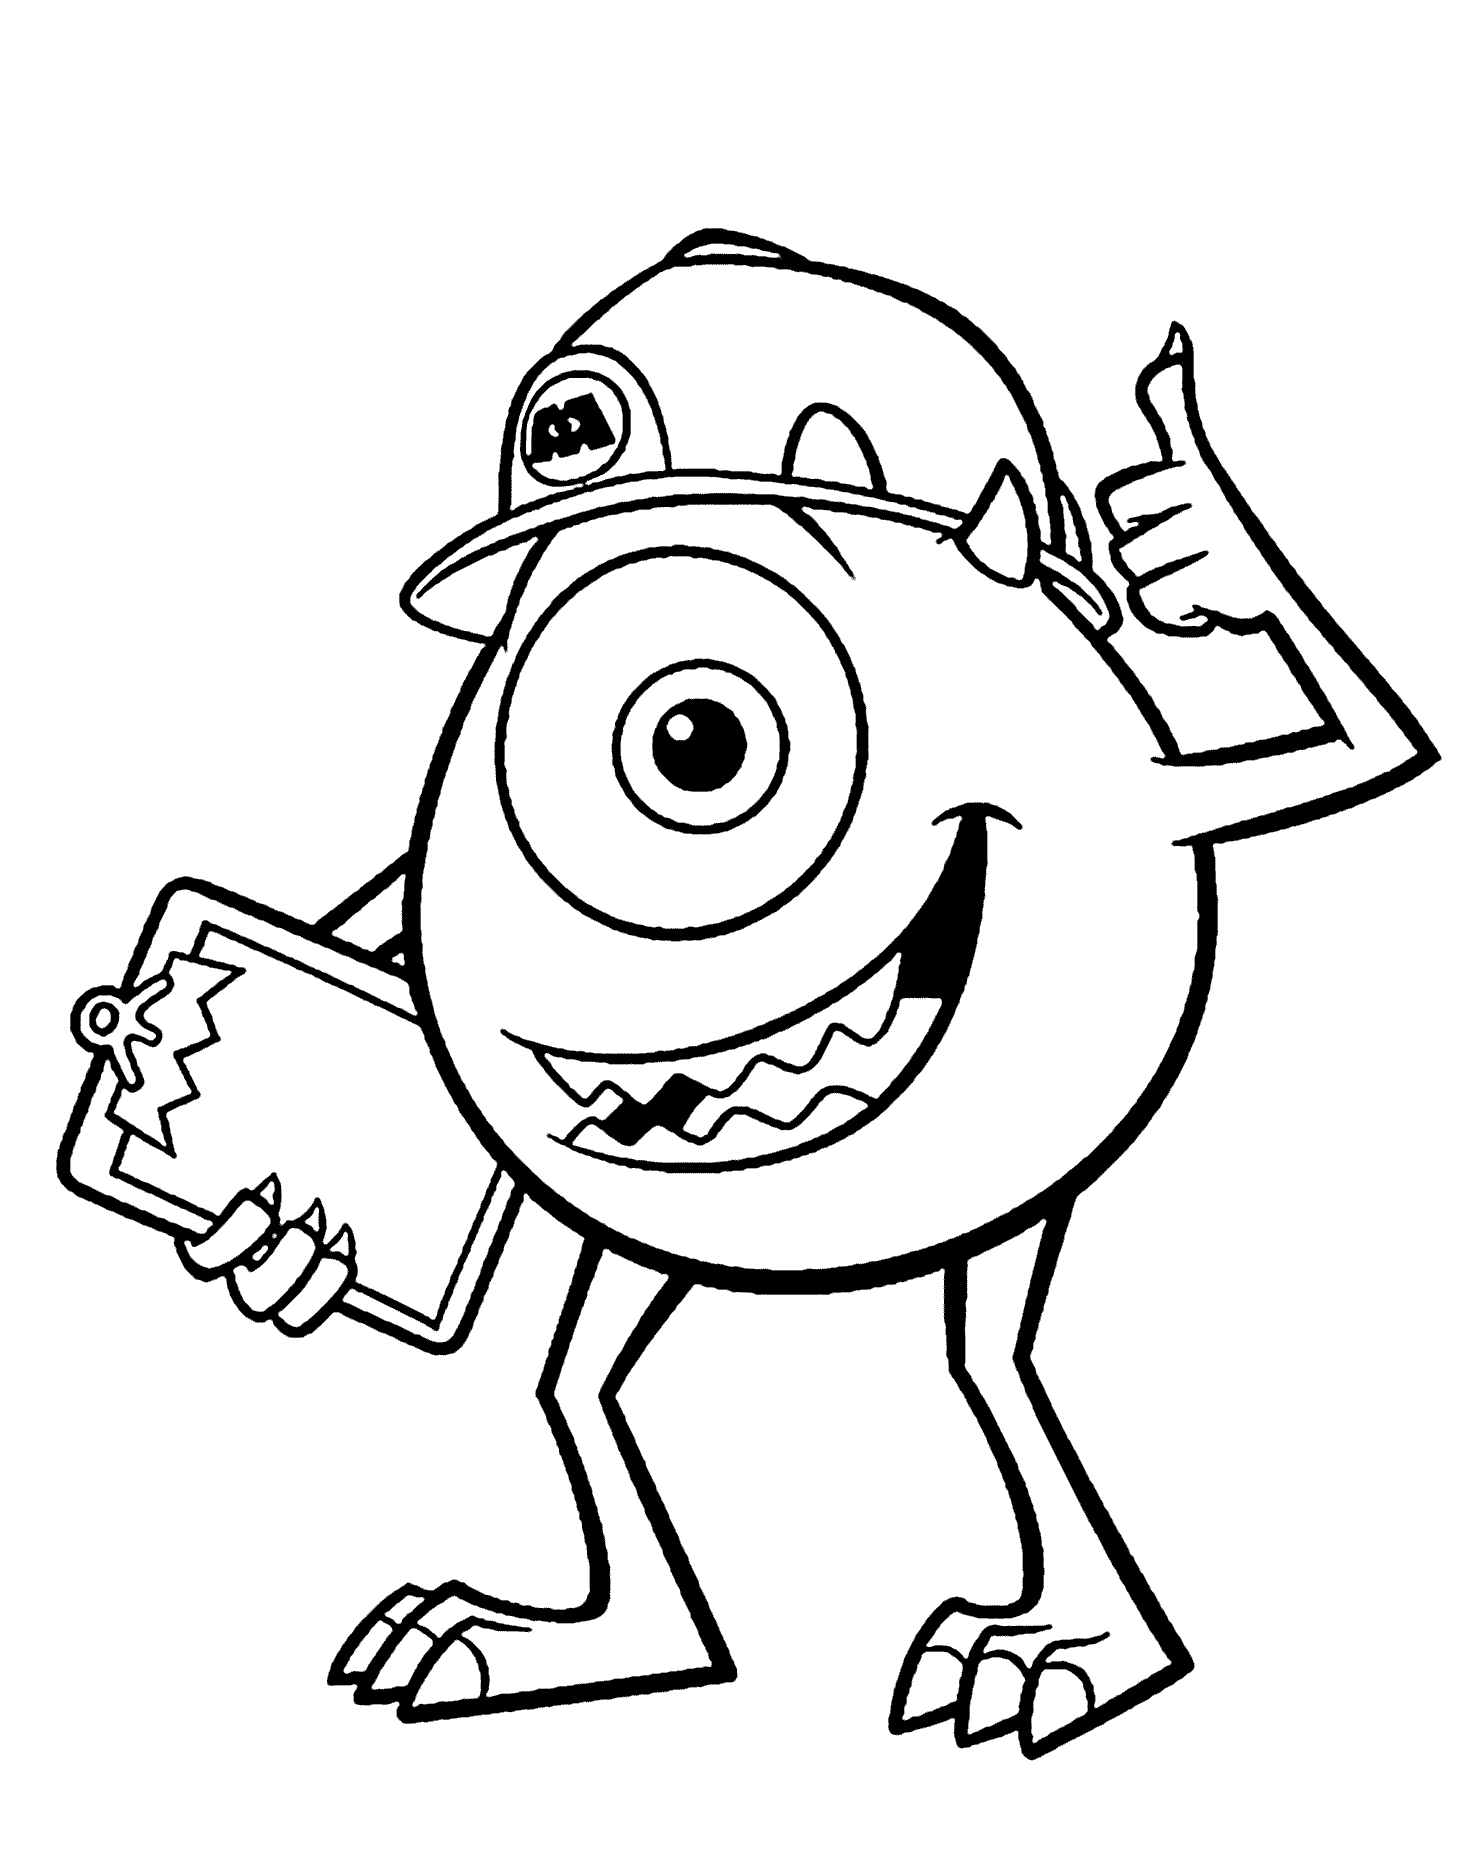 Mike From Monter Inc Coloring Page